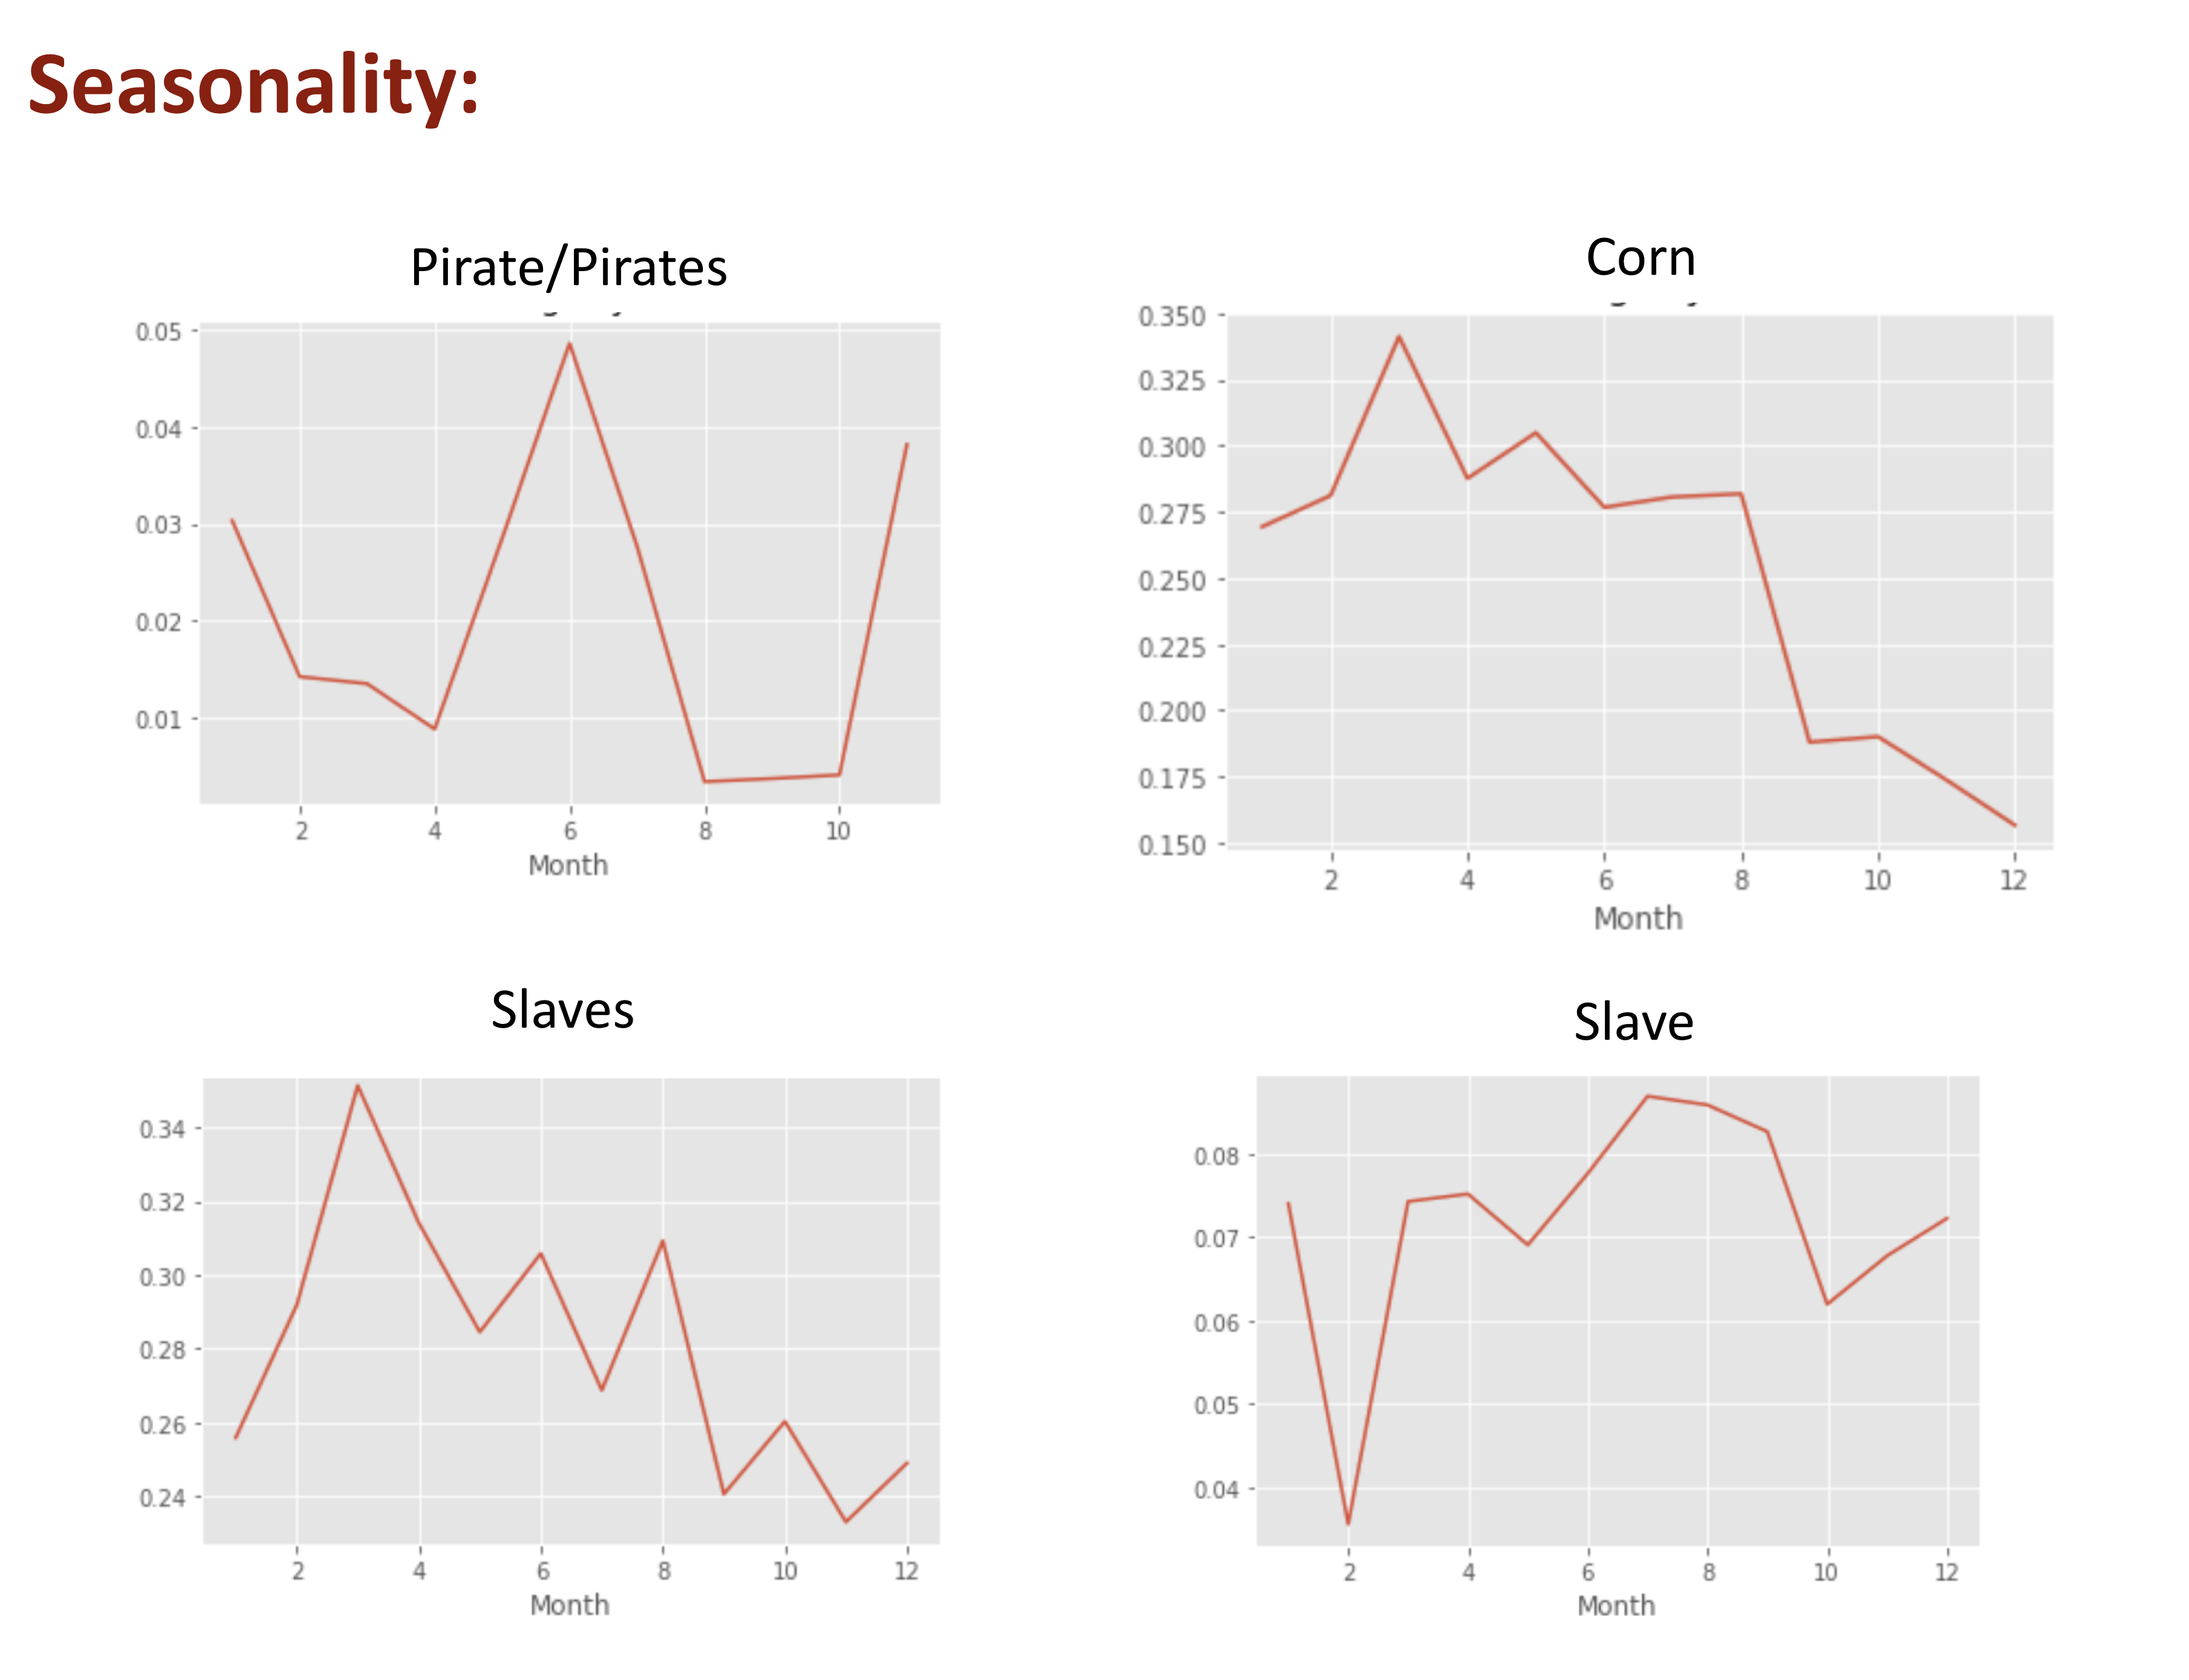 Four line graphs compare the different seasonal patterns between the terms “pirate”/“pirates”; “corn”; “slave”; and “slaves.”